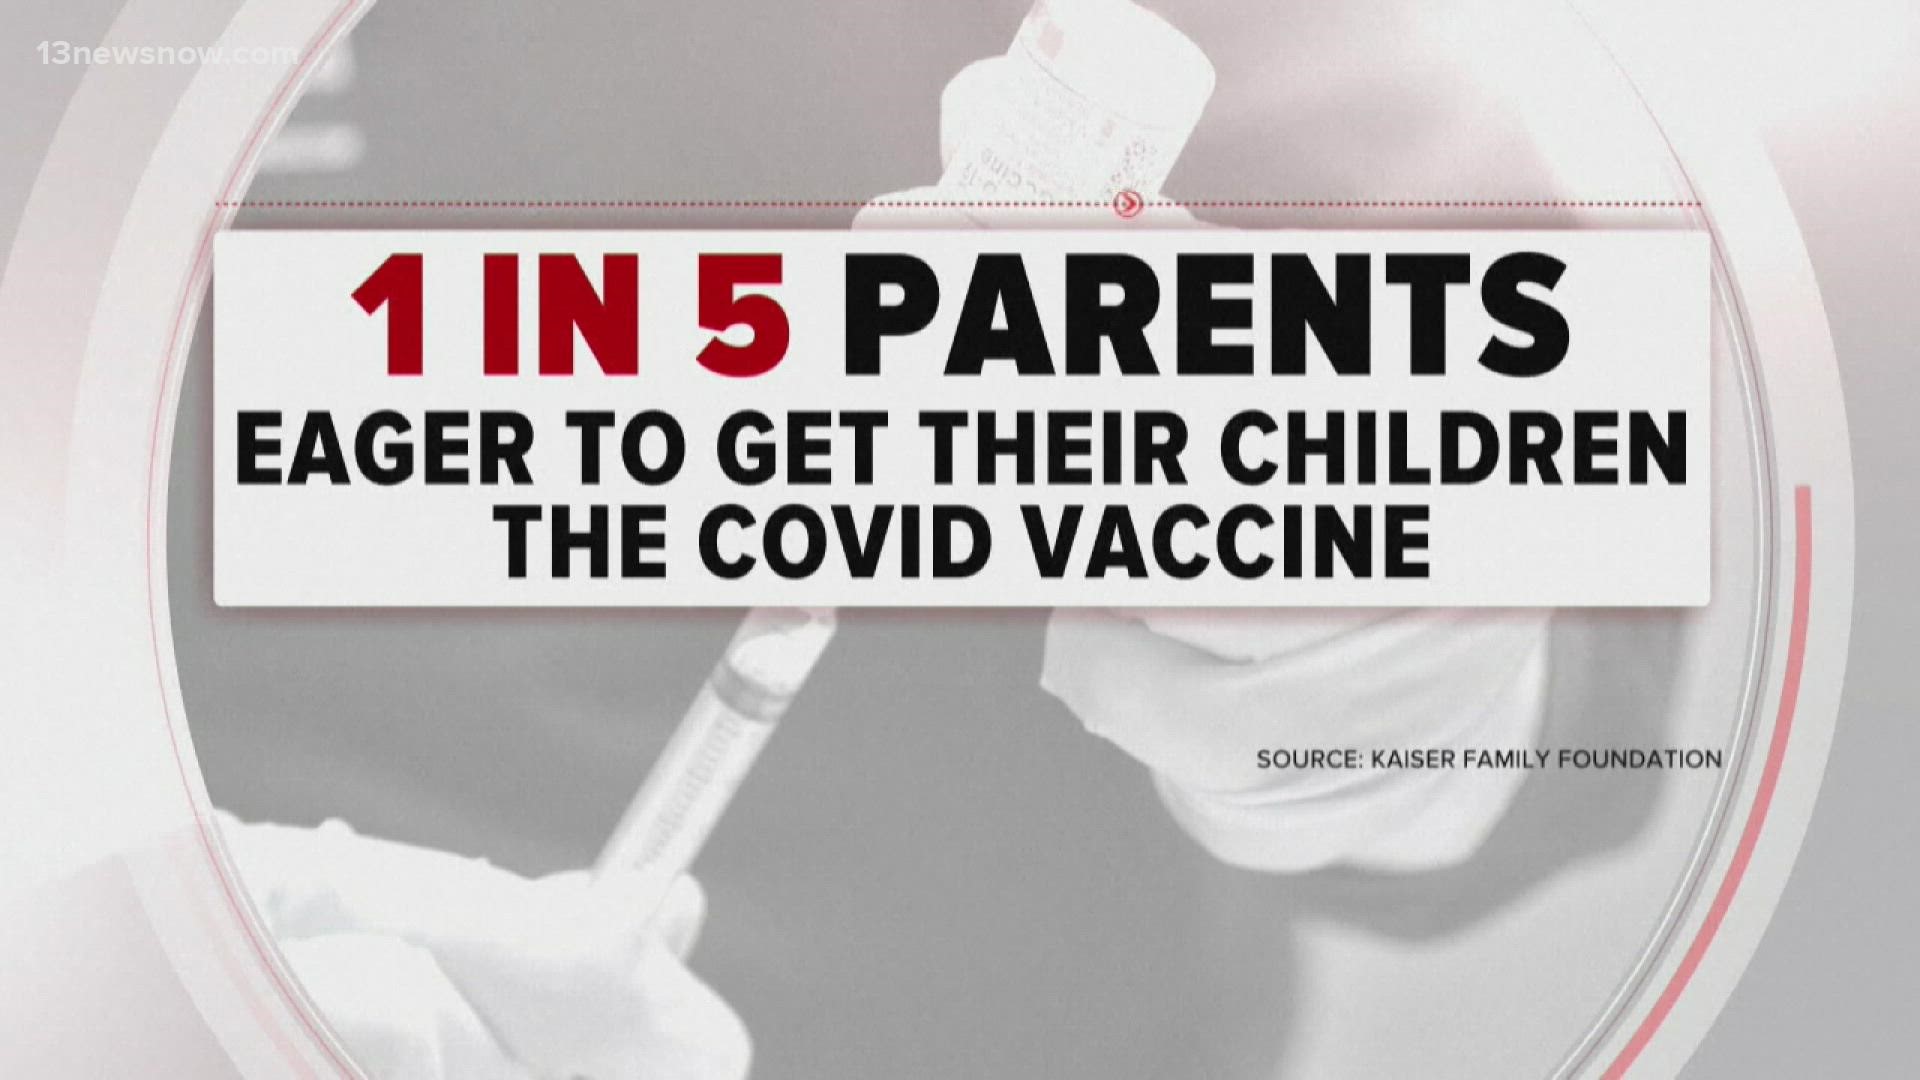 Big news for parents: the CDC approved two COVID-19 vaccines for children under 5 years old.